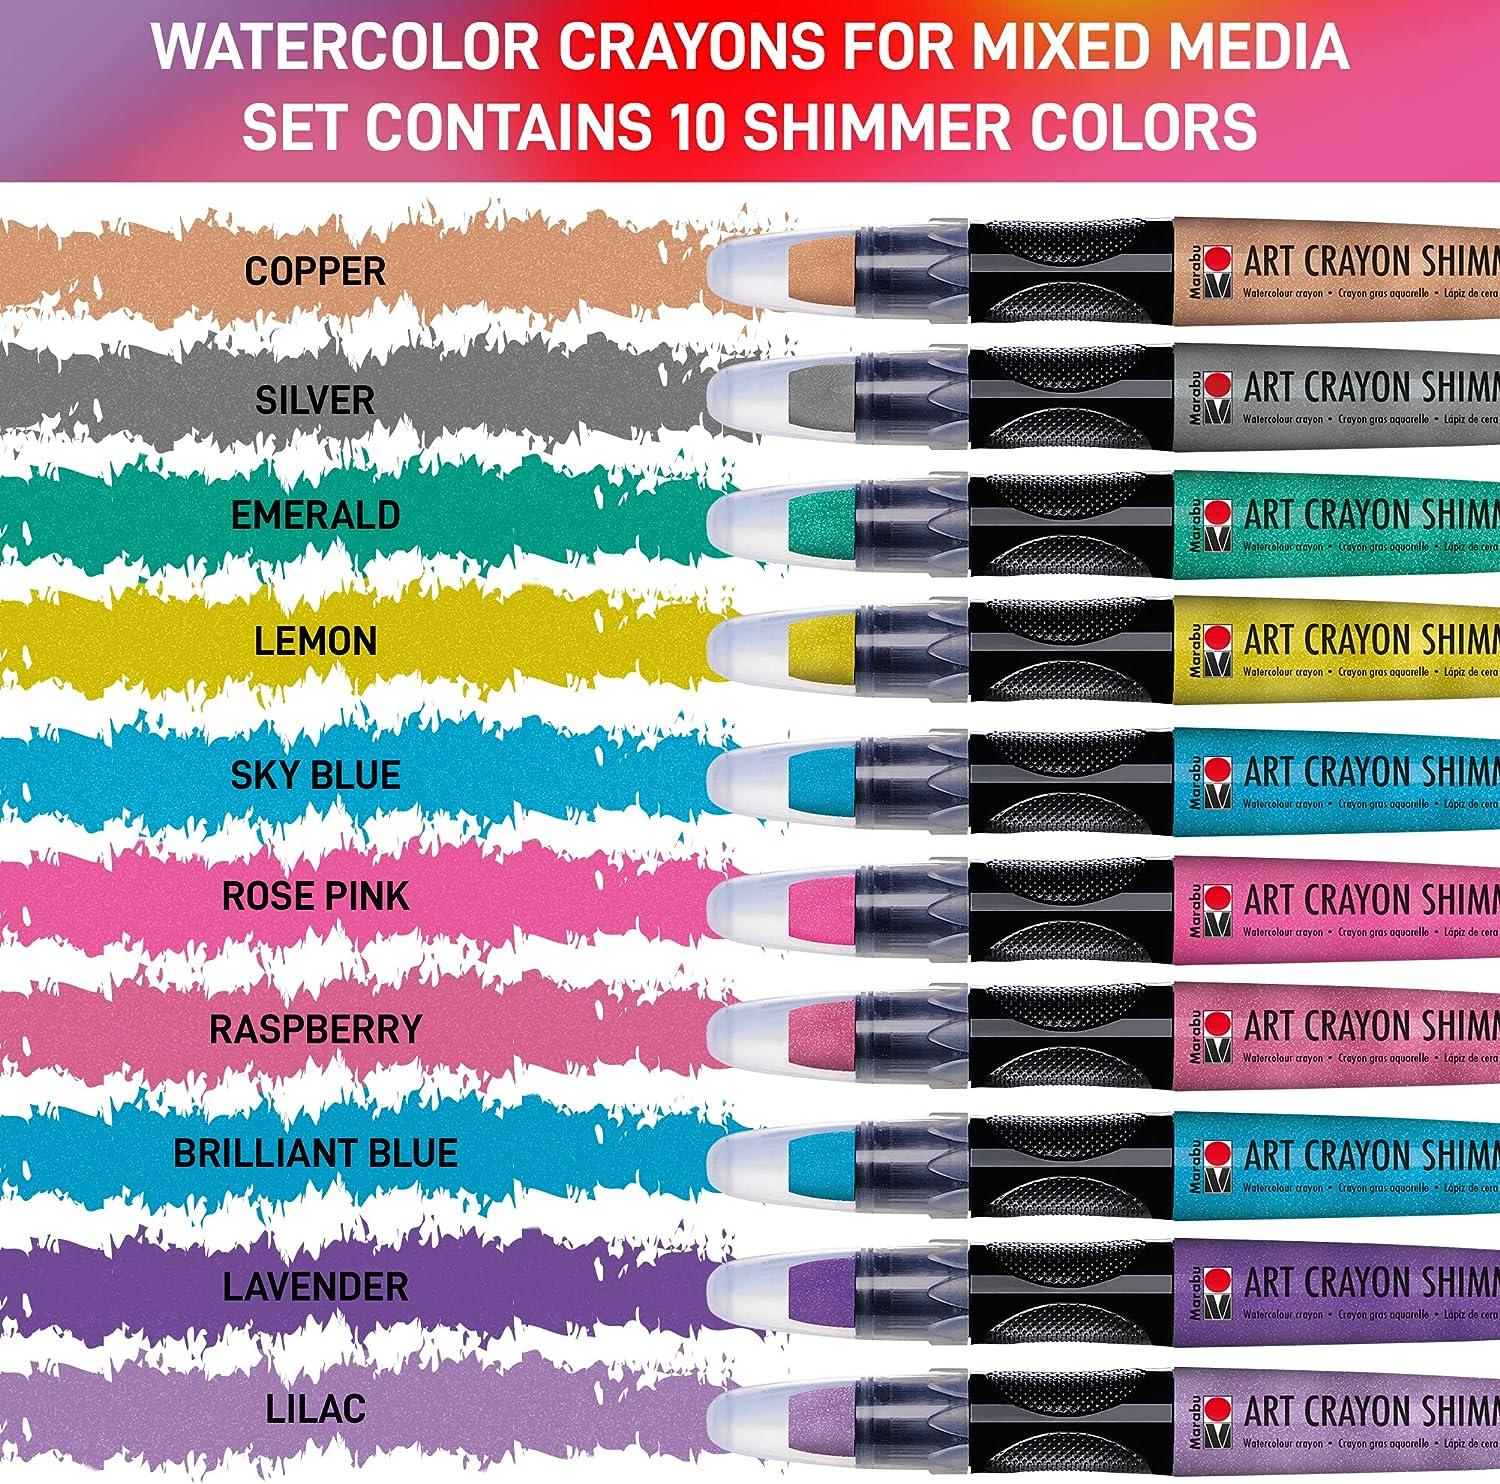 Marabu Art Crayons Shimmer Set - 10 Highly Pigmented Metallic Watercolor  Crayons - Smooth and Easy Blending Water Soluble Crayons for Mixed Media  Artists - Arts and Crafts for Adults